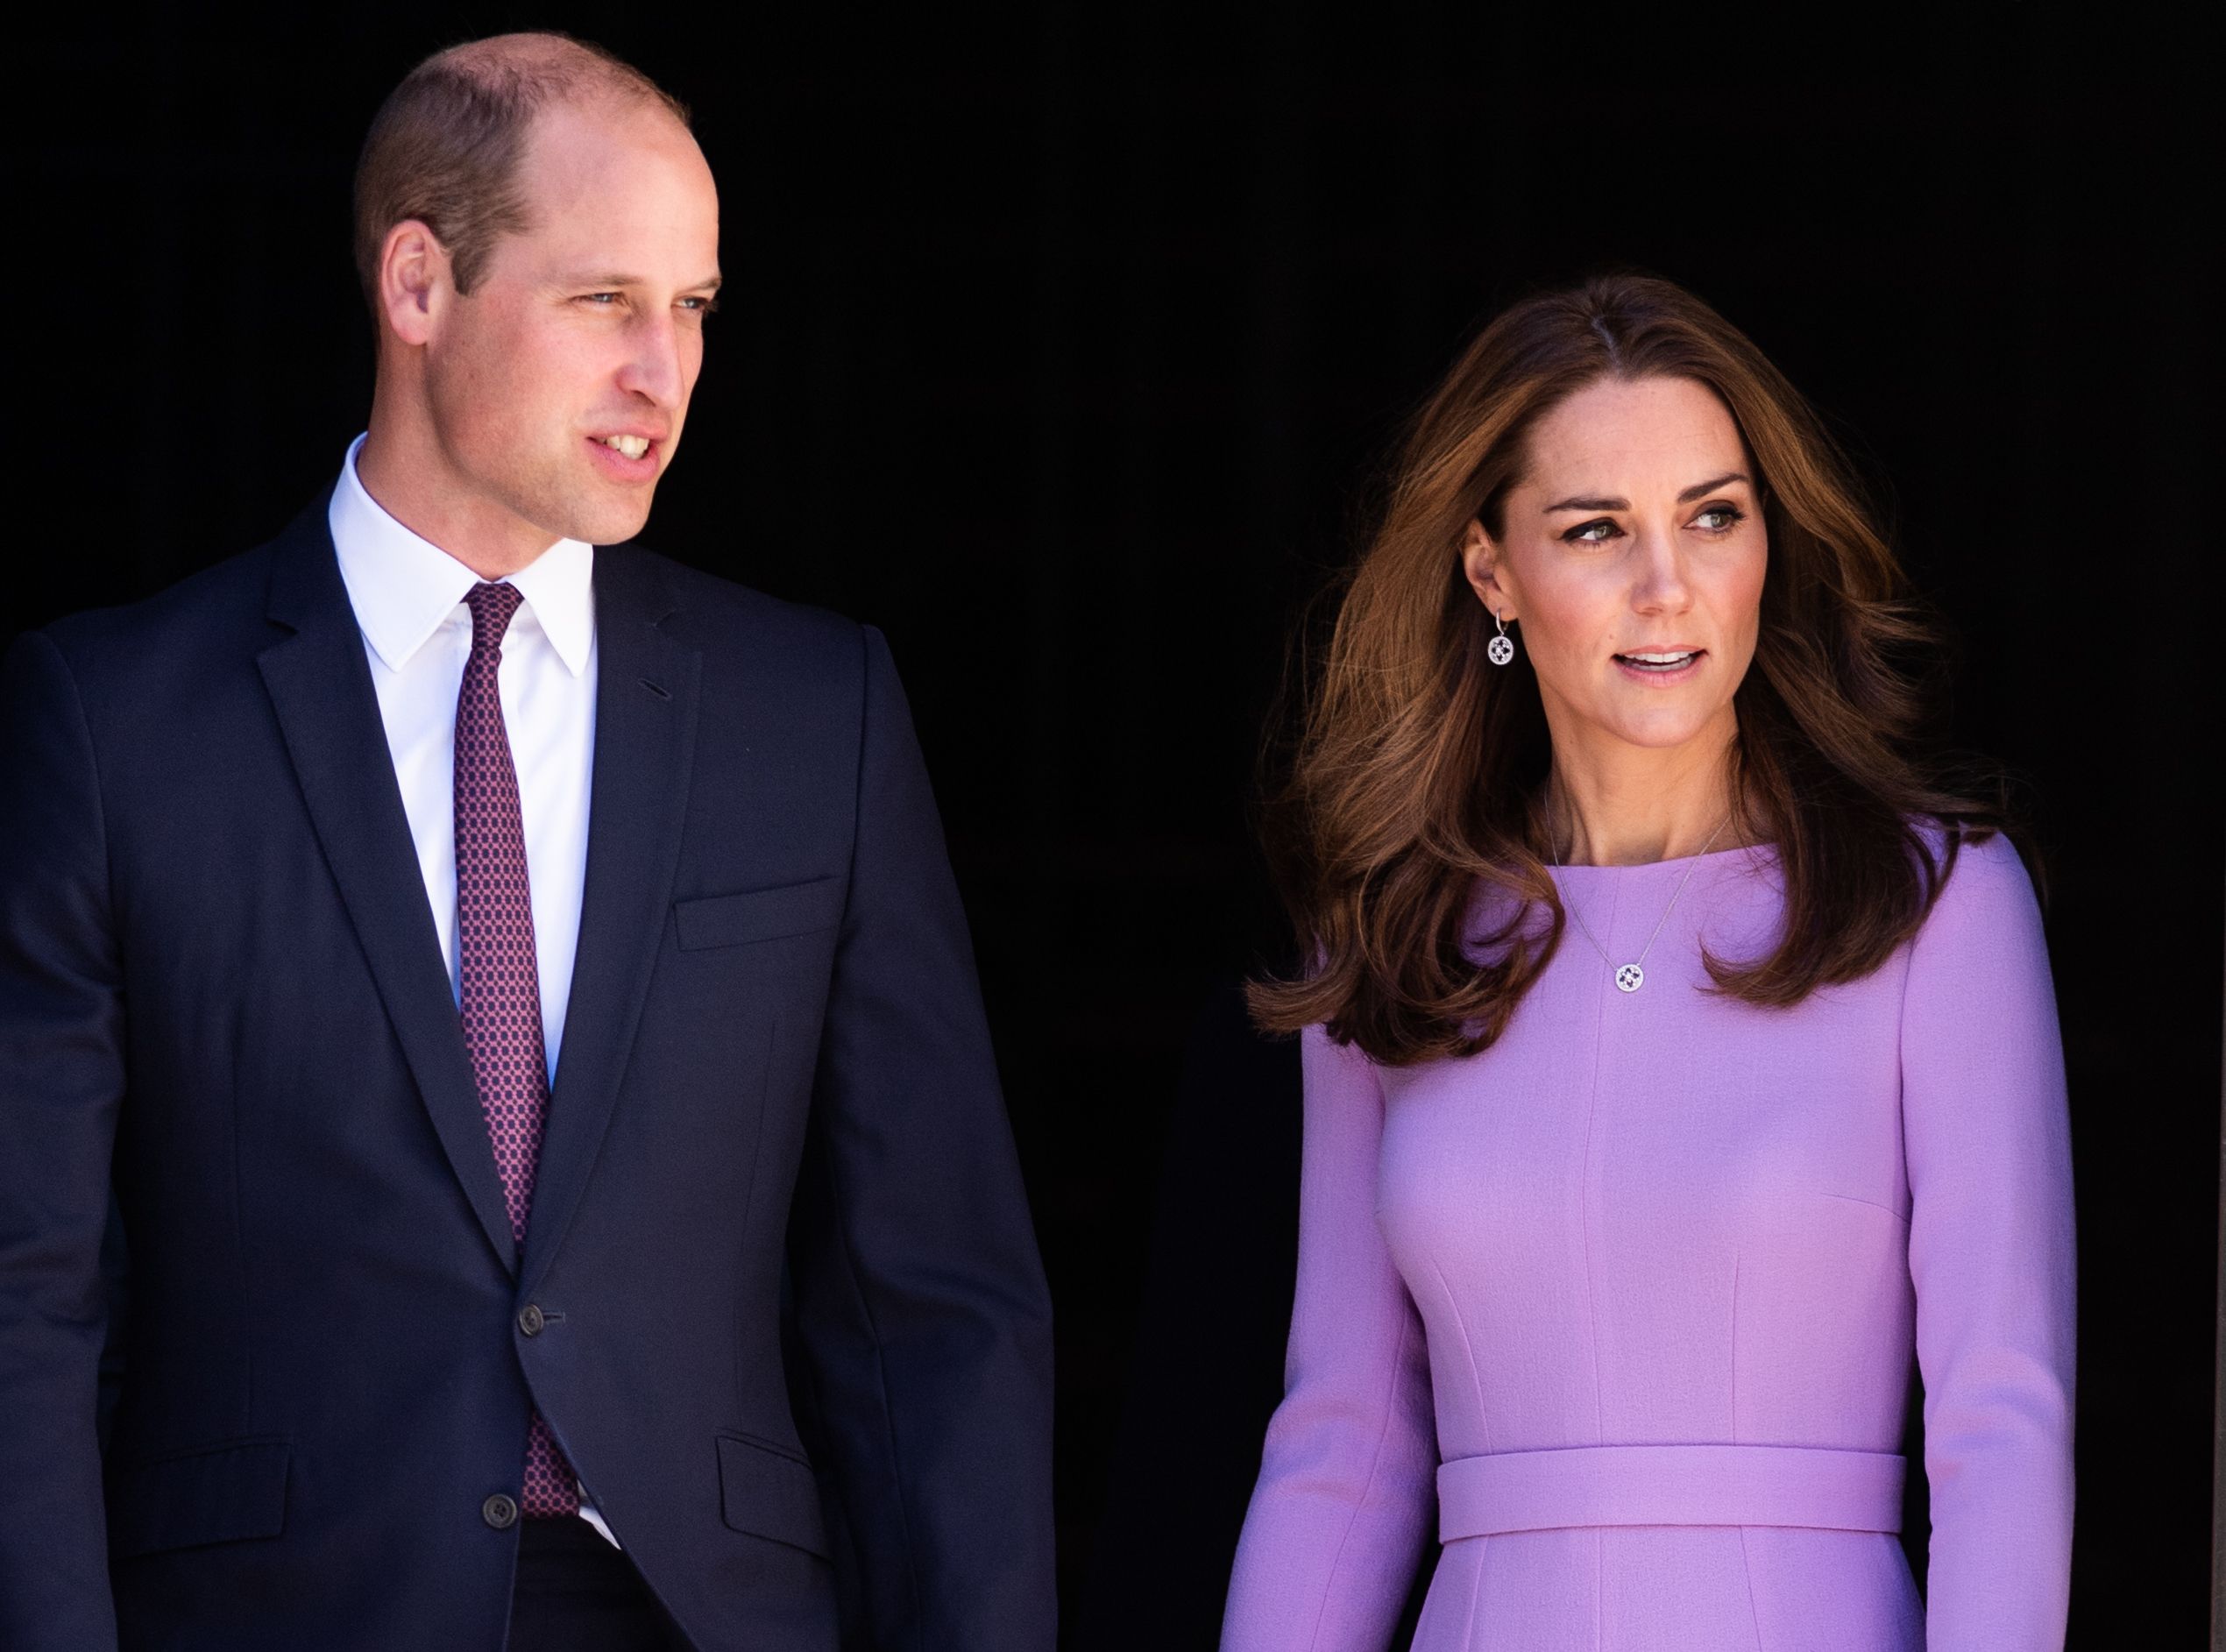 Kate Middleton and Prince William Share a Personal Mental Health Message on Instagram